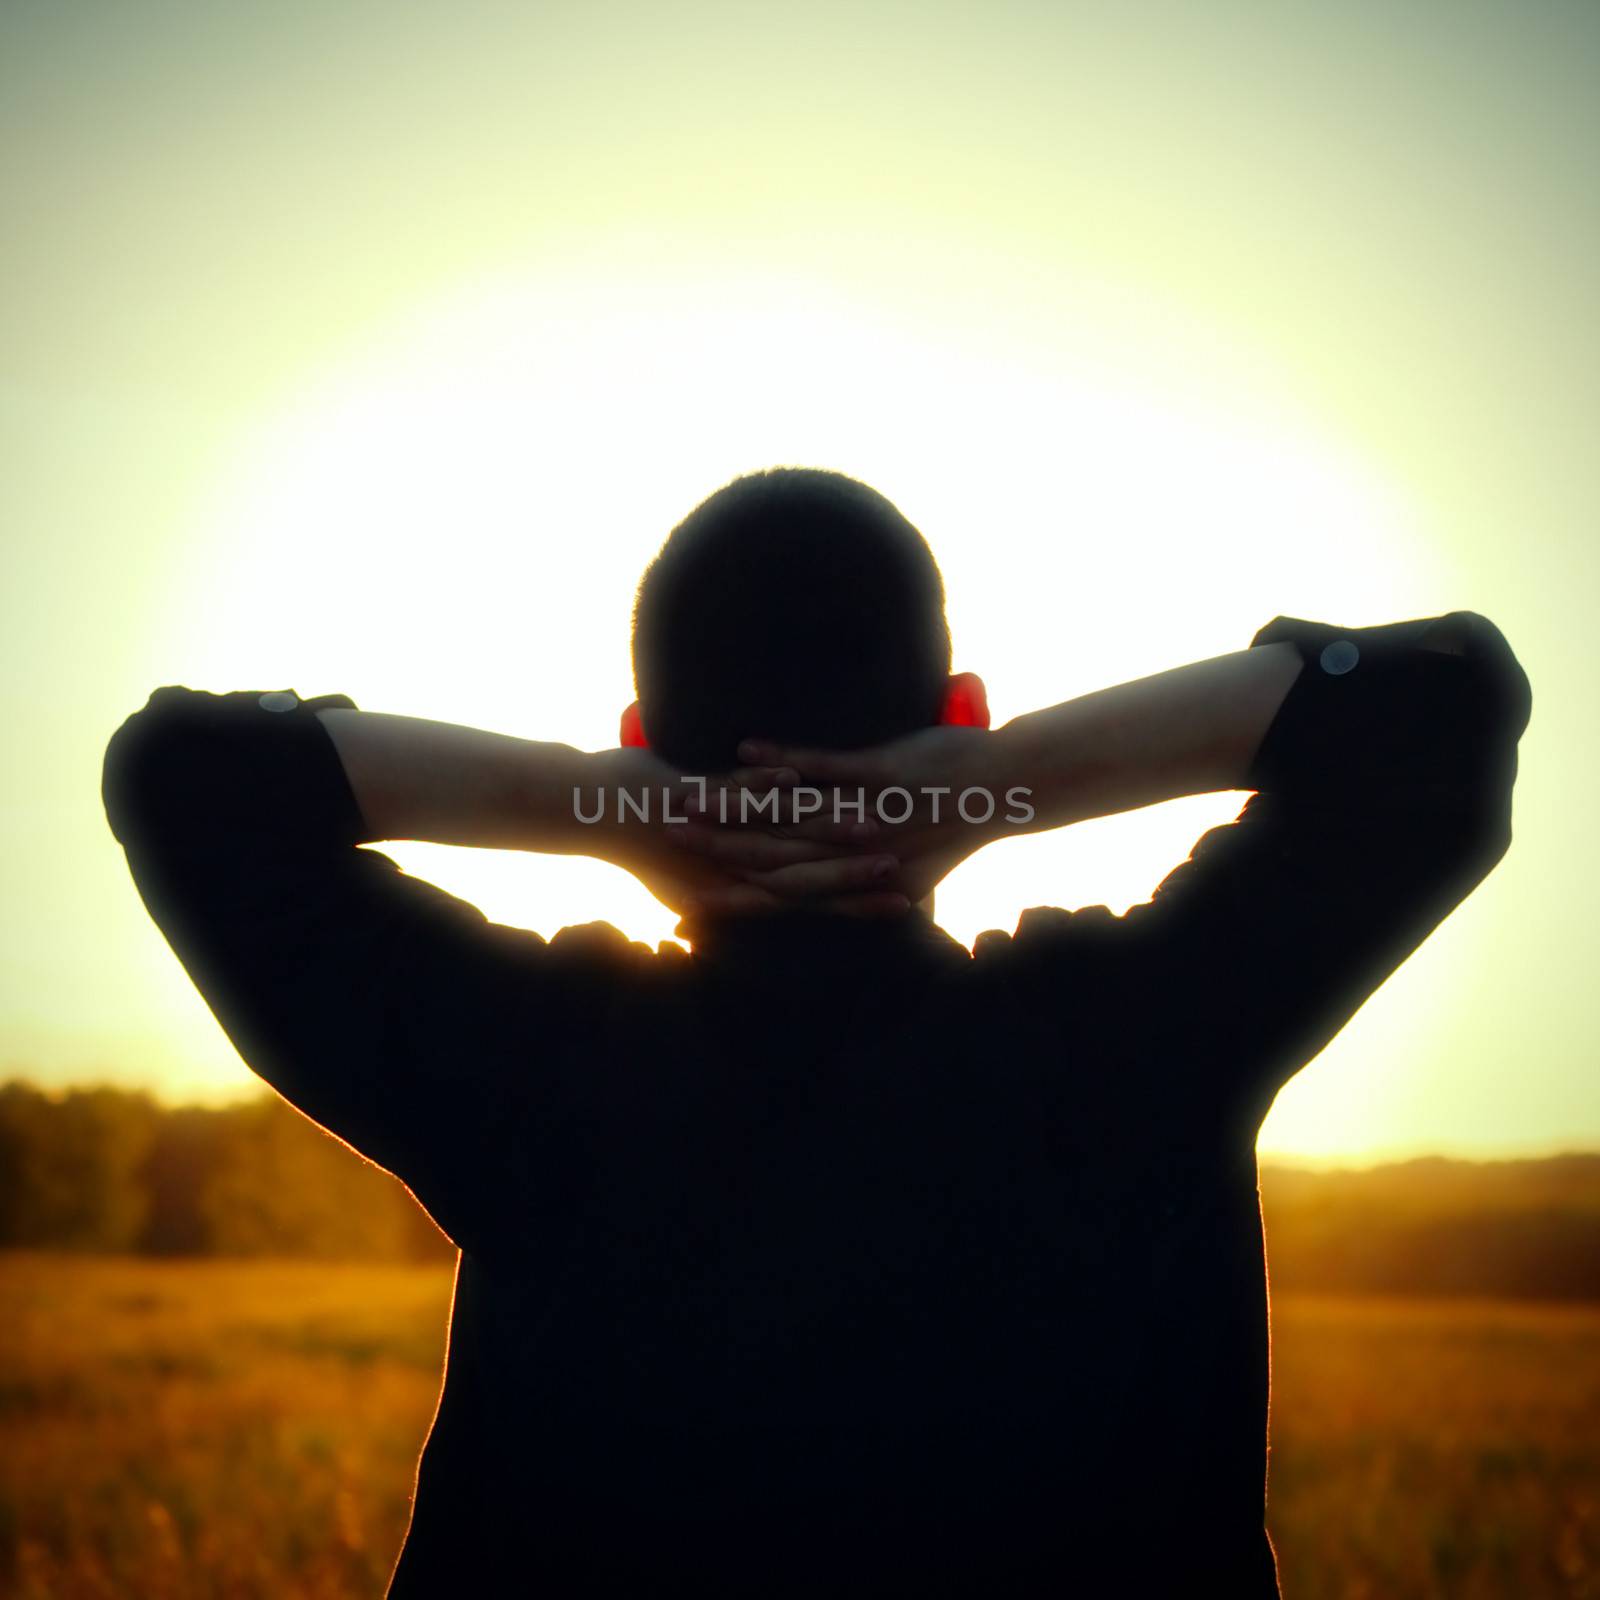 Vintage photo of Young Man silhouette on sunset background